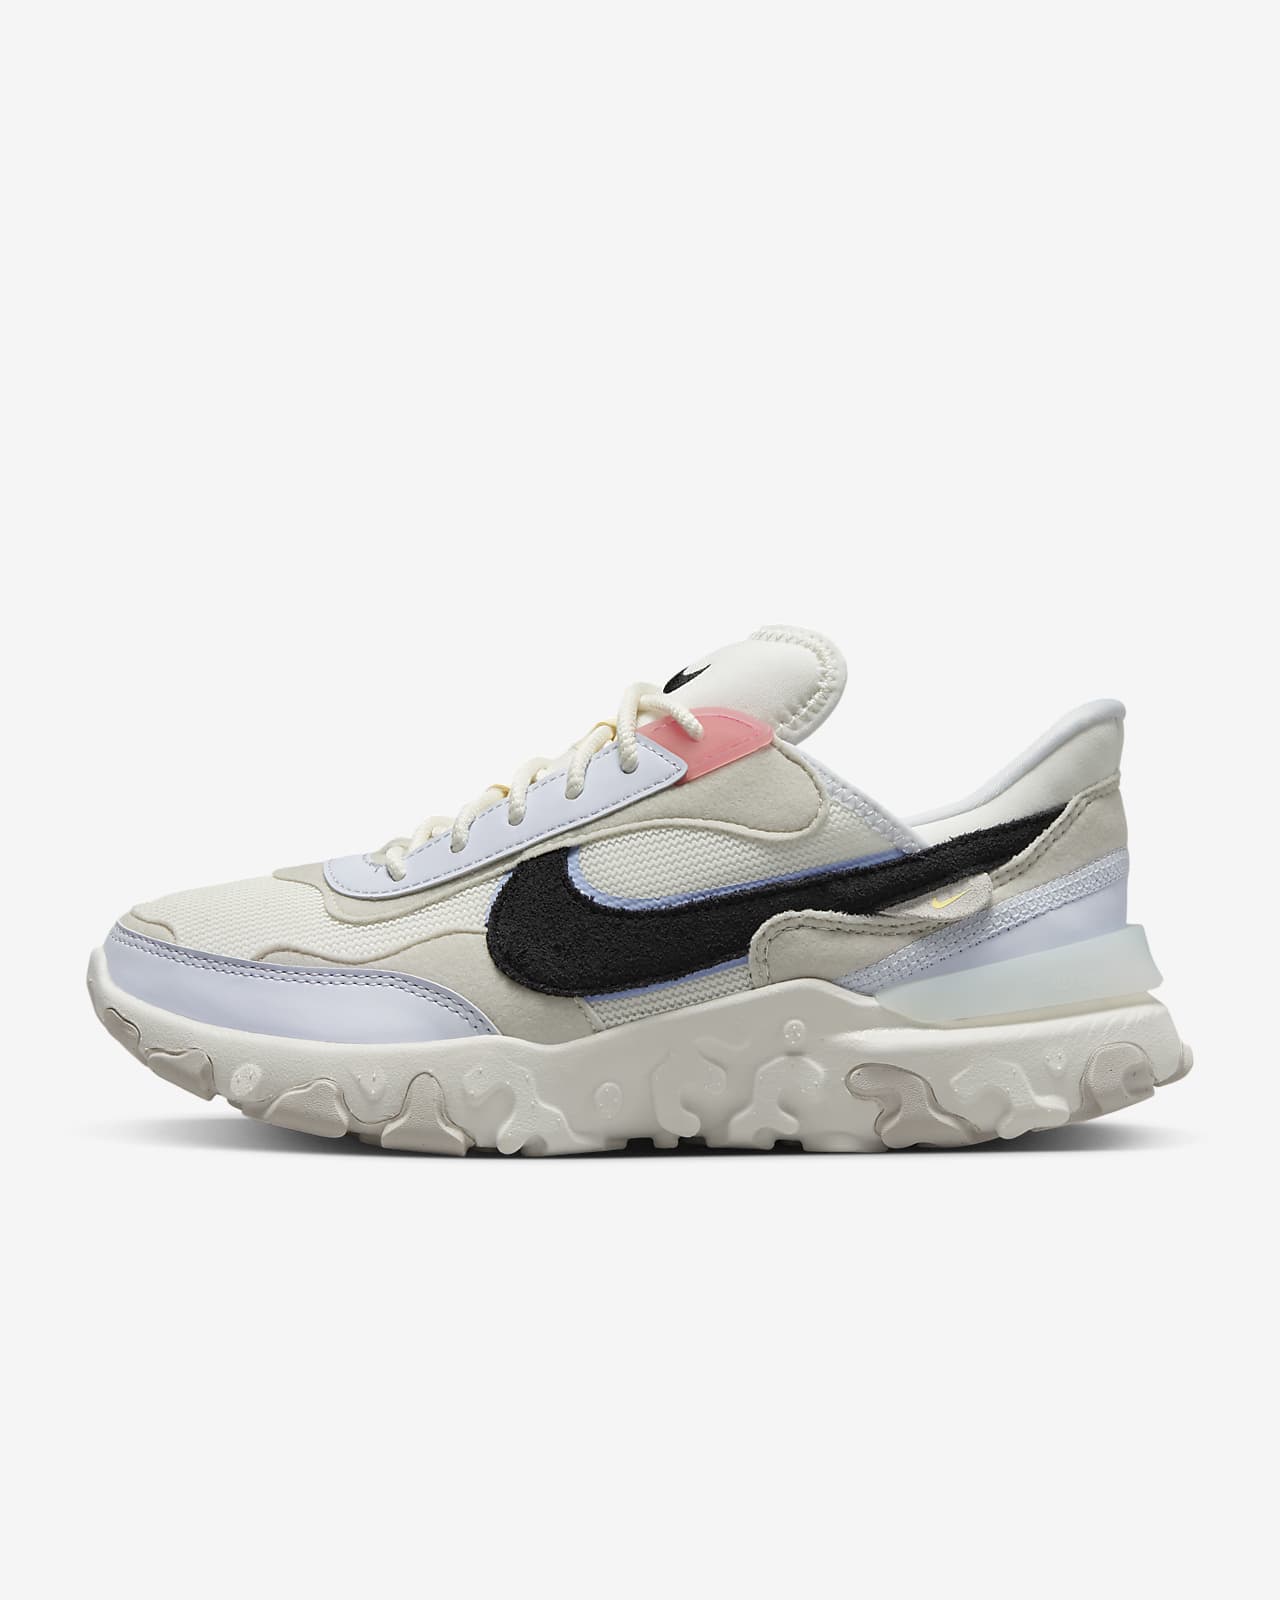 Nike React Revision Women's Shoes